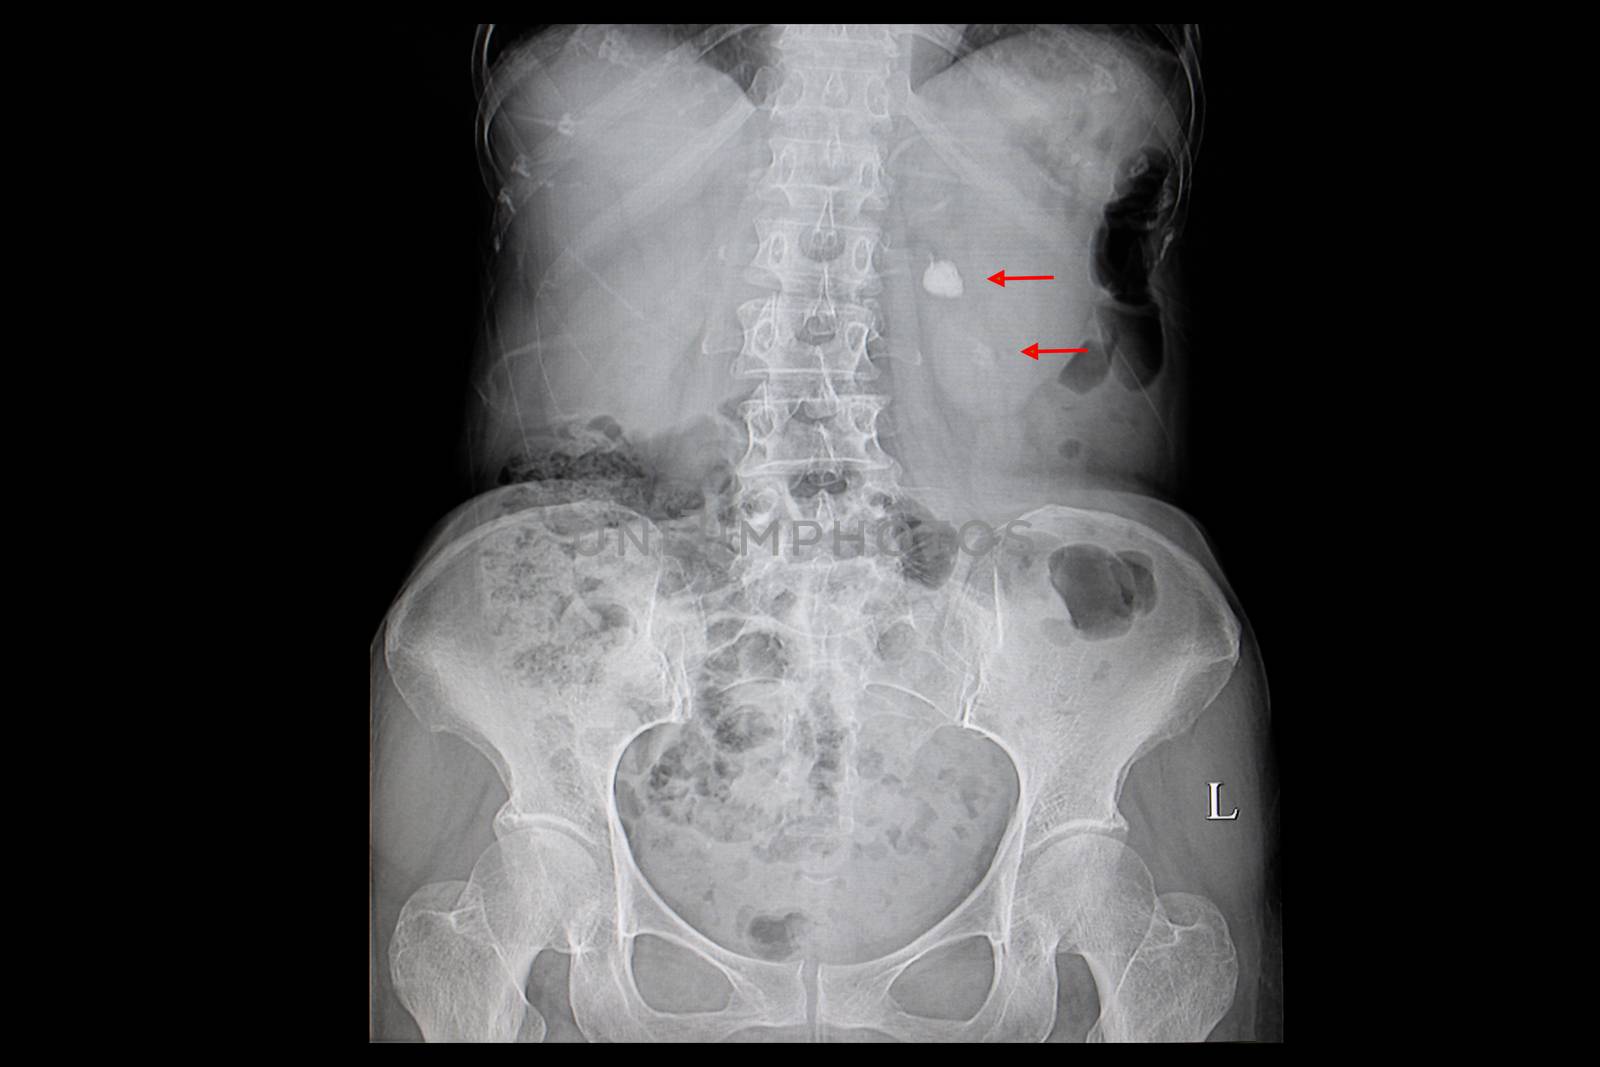 Xray film of a patient with a large stone in the right renal pelvis and calcification in the lower pole of the kidney.